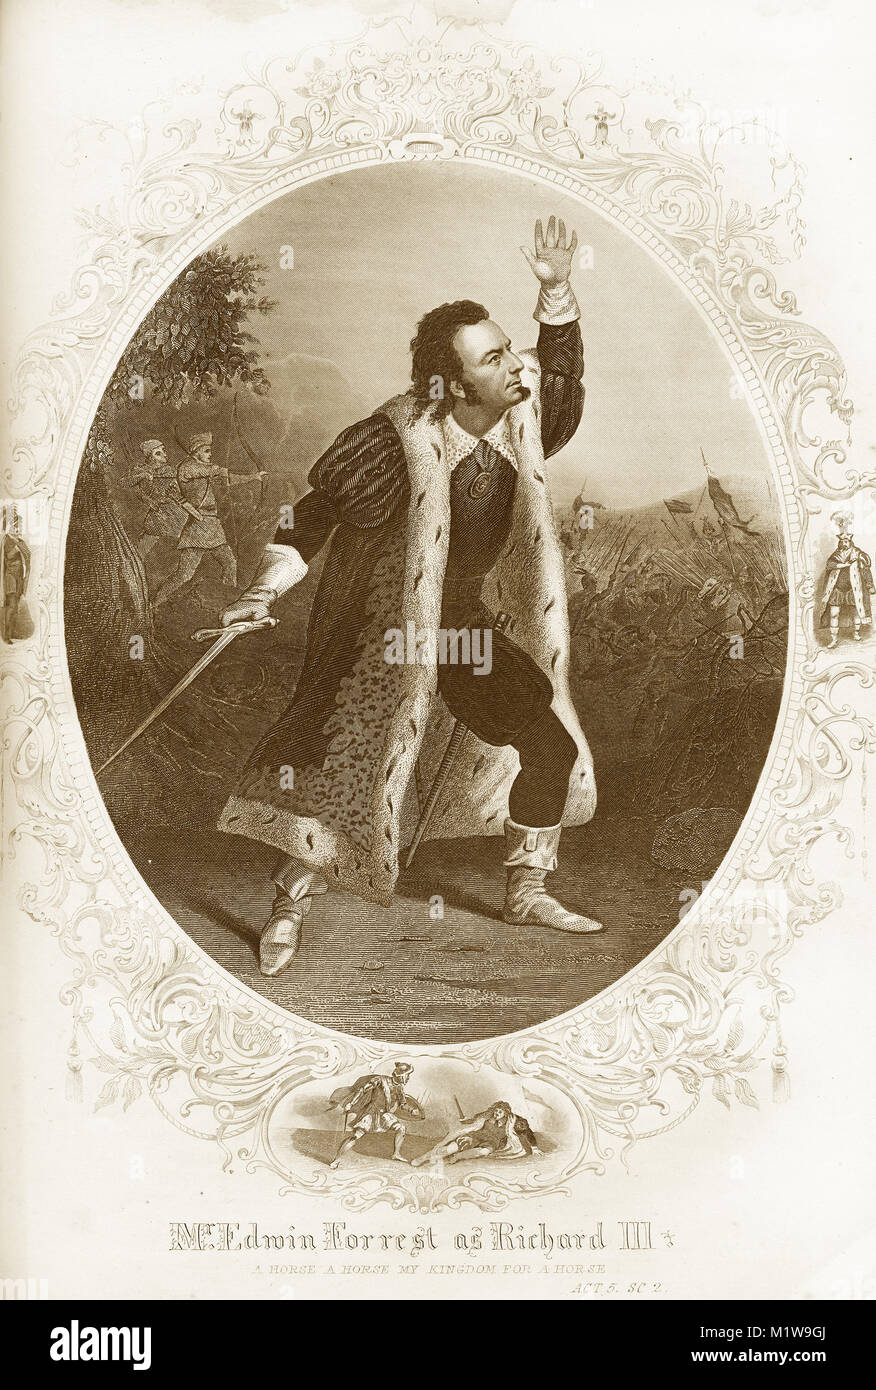 Engraving of the Shakespearean character Richard III, acted by  an American, Edwin Forrest, in Richard III. From the Illustrated Complete Works of Shakespeare, 1878 Stock Photo